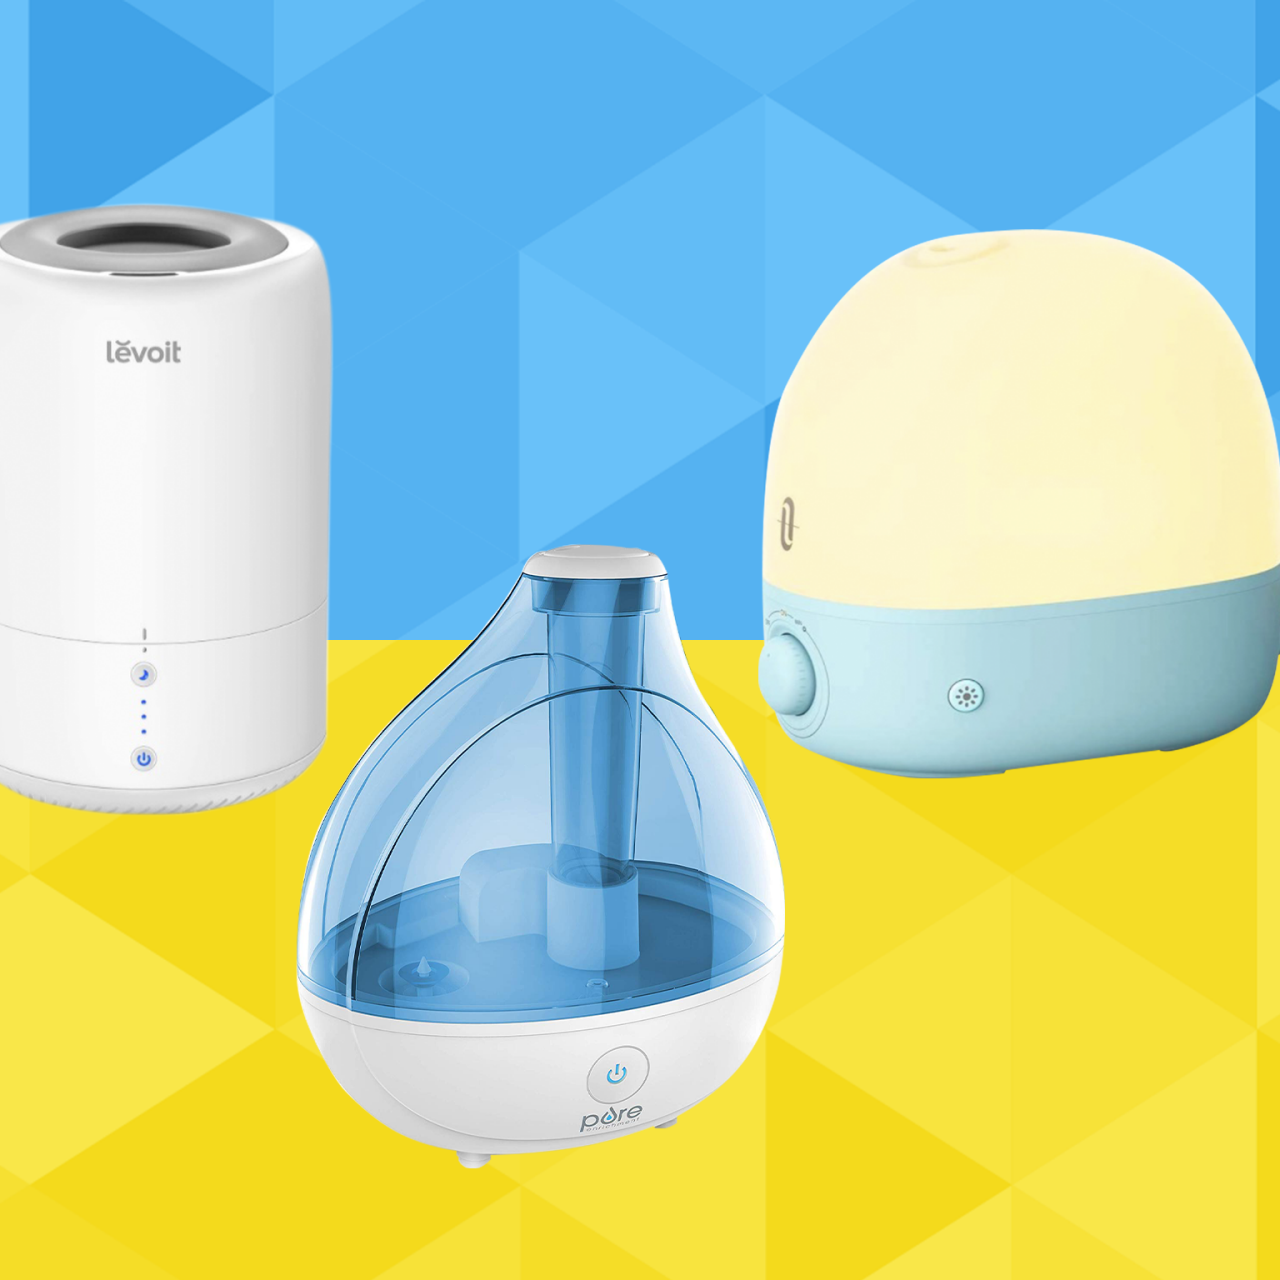 Humidifiers for Bedroom Large Room, 8L Large Ultrasonic Top Fill Humidifier  with 3 Speed Humidistat for Baby Kids Adults Home Yoga Sleep